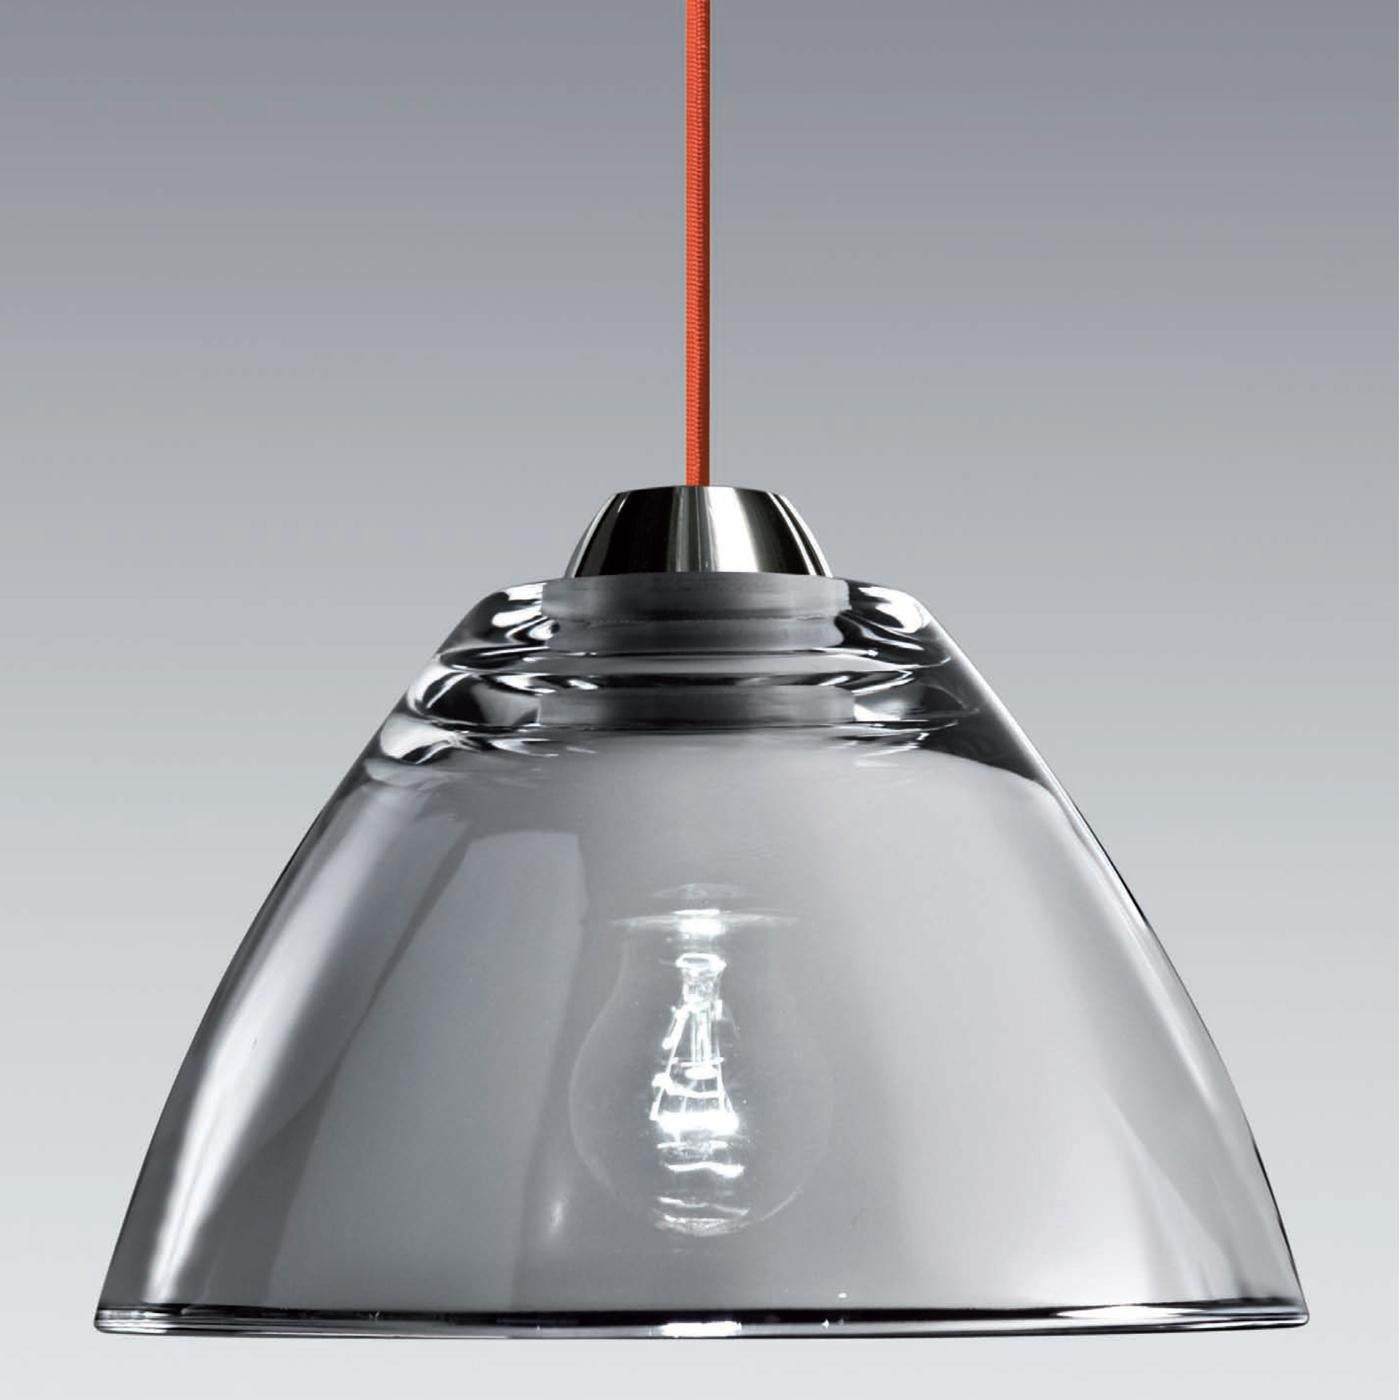 Modern and versatile, this pendant lamp embodies the timeless elegance of glass. The polished chrome frame perfectly complements the conical diffuser of blown glass enriched by a sophisticated mirror finish that is suspended from the ceiling with a